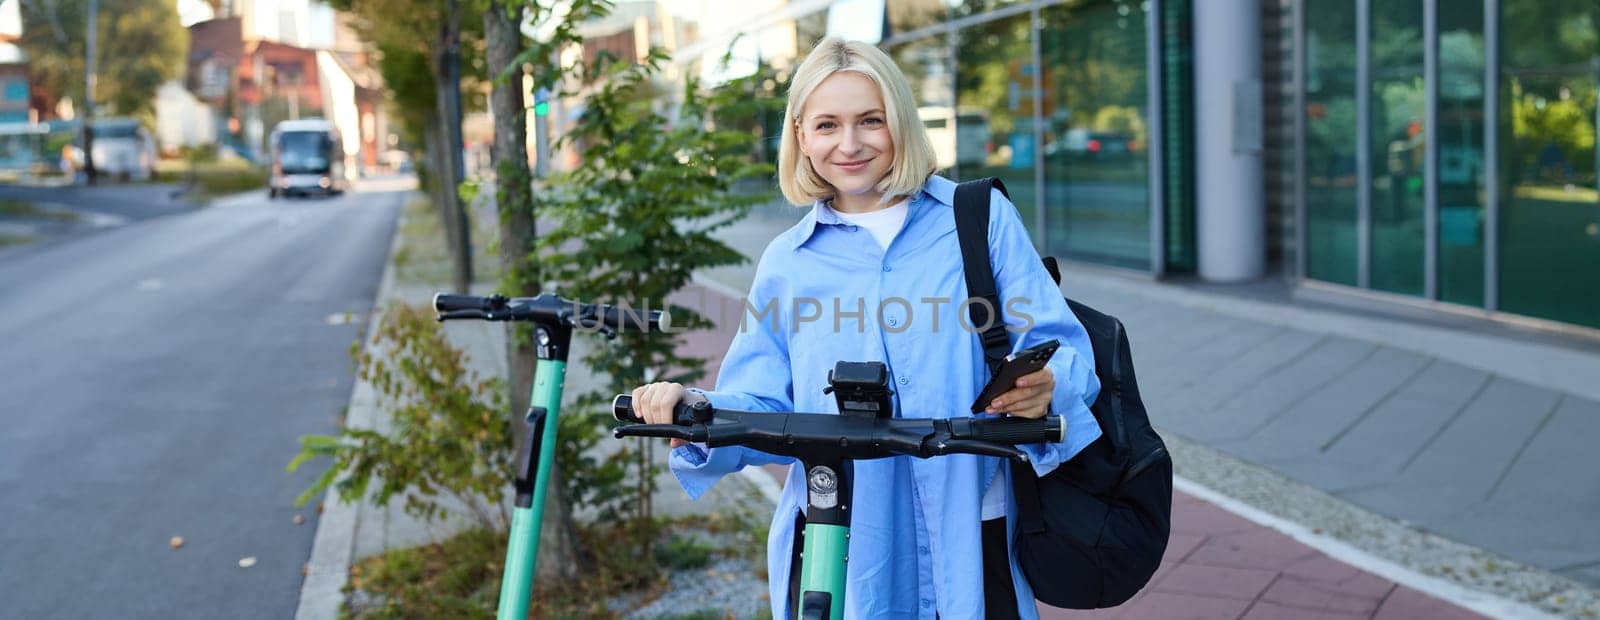 Woman Scanning QR Code on Handlebar of Shared Electric Scooter. Close up of Female Hand Holding Smartphone Unlocking Green E-Scooter in Street.